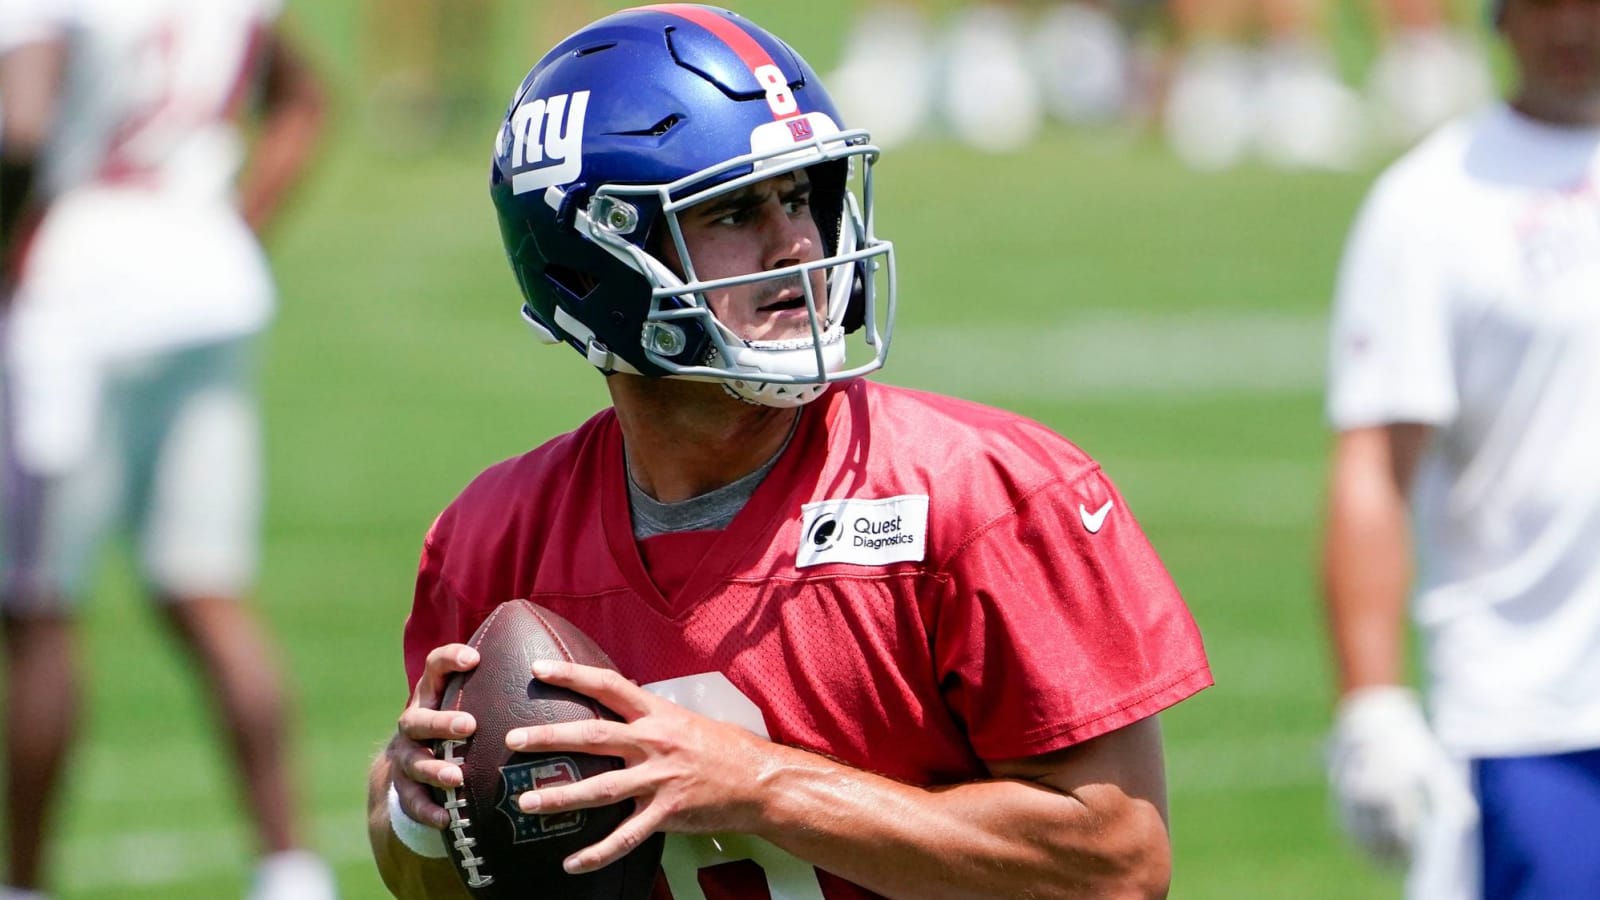 Five reasons the New York Giants are dark horses in 2021